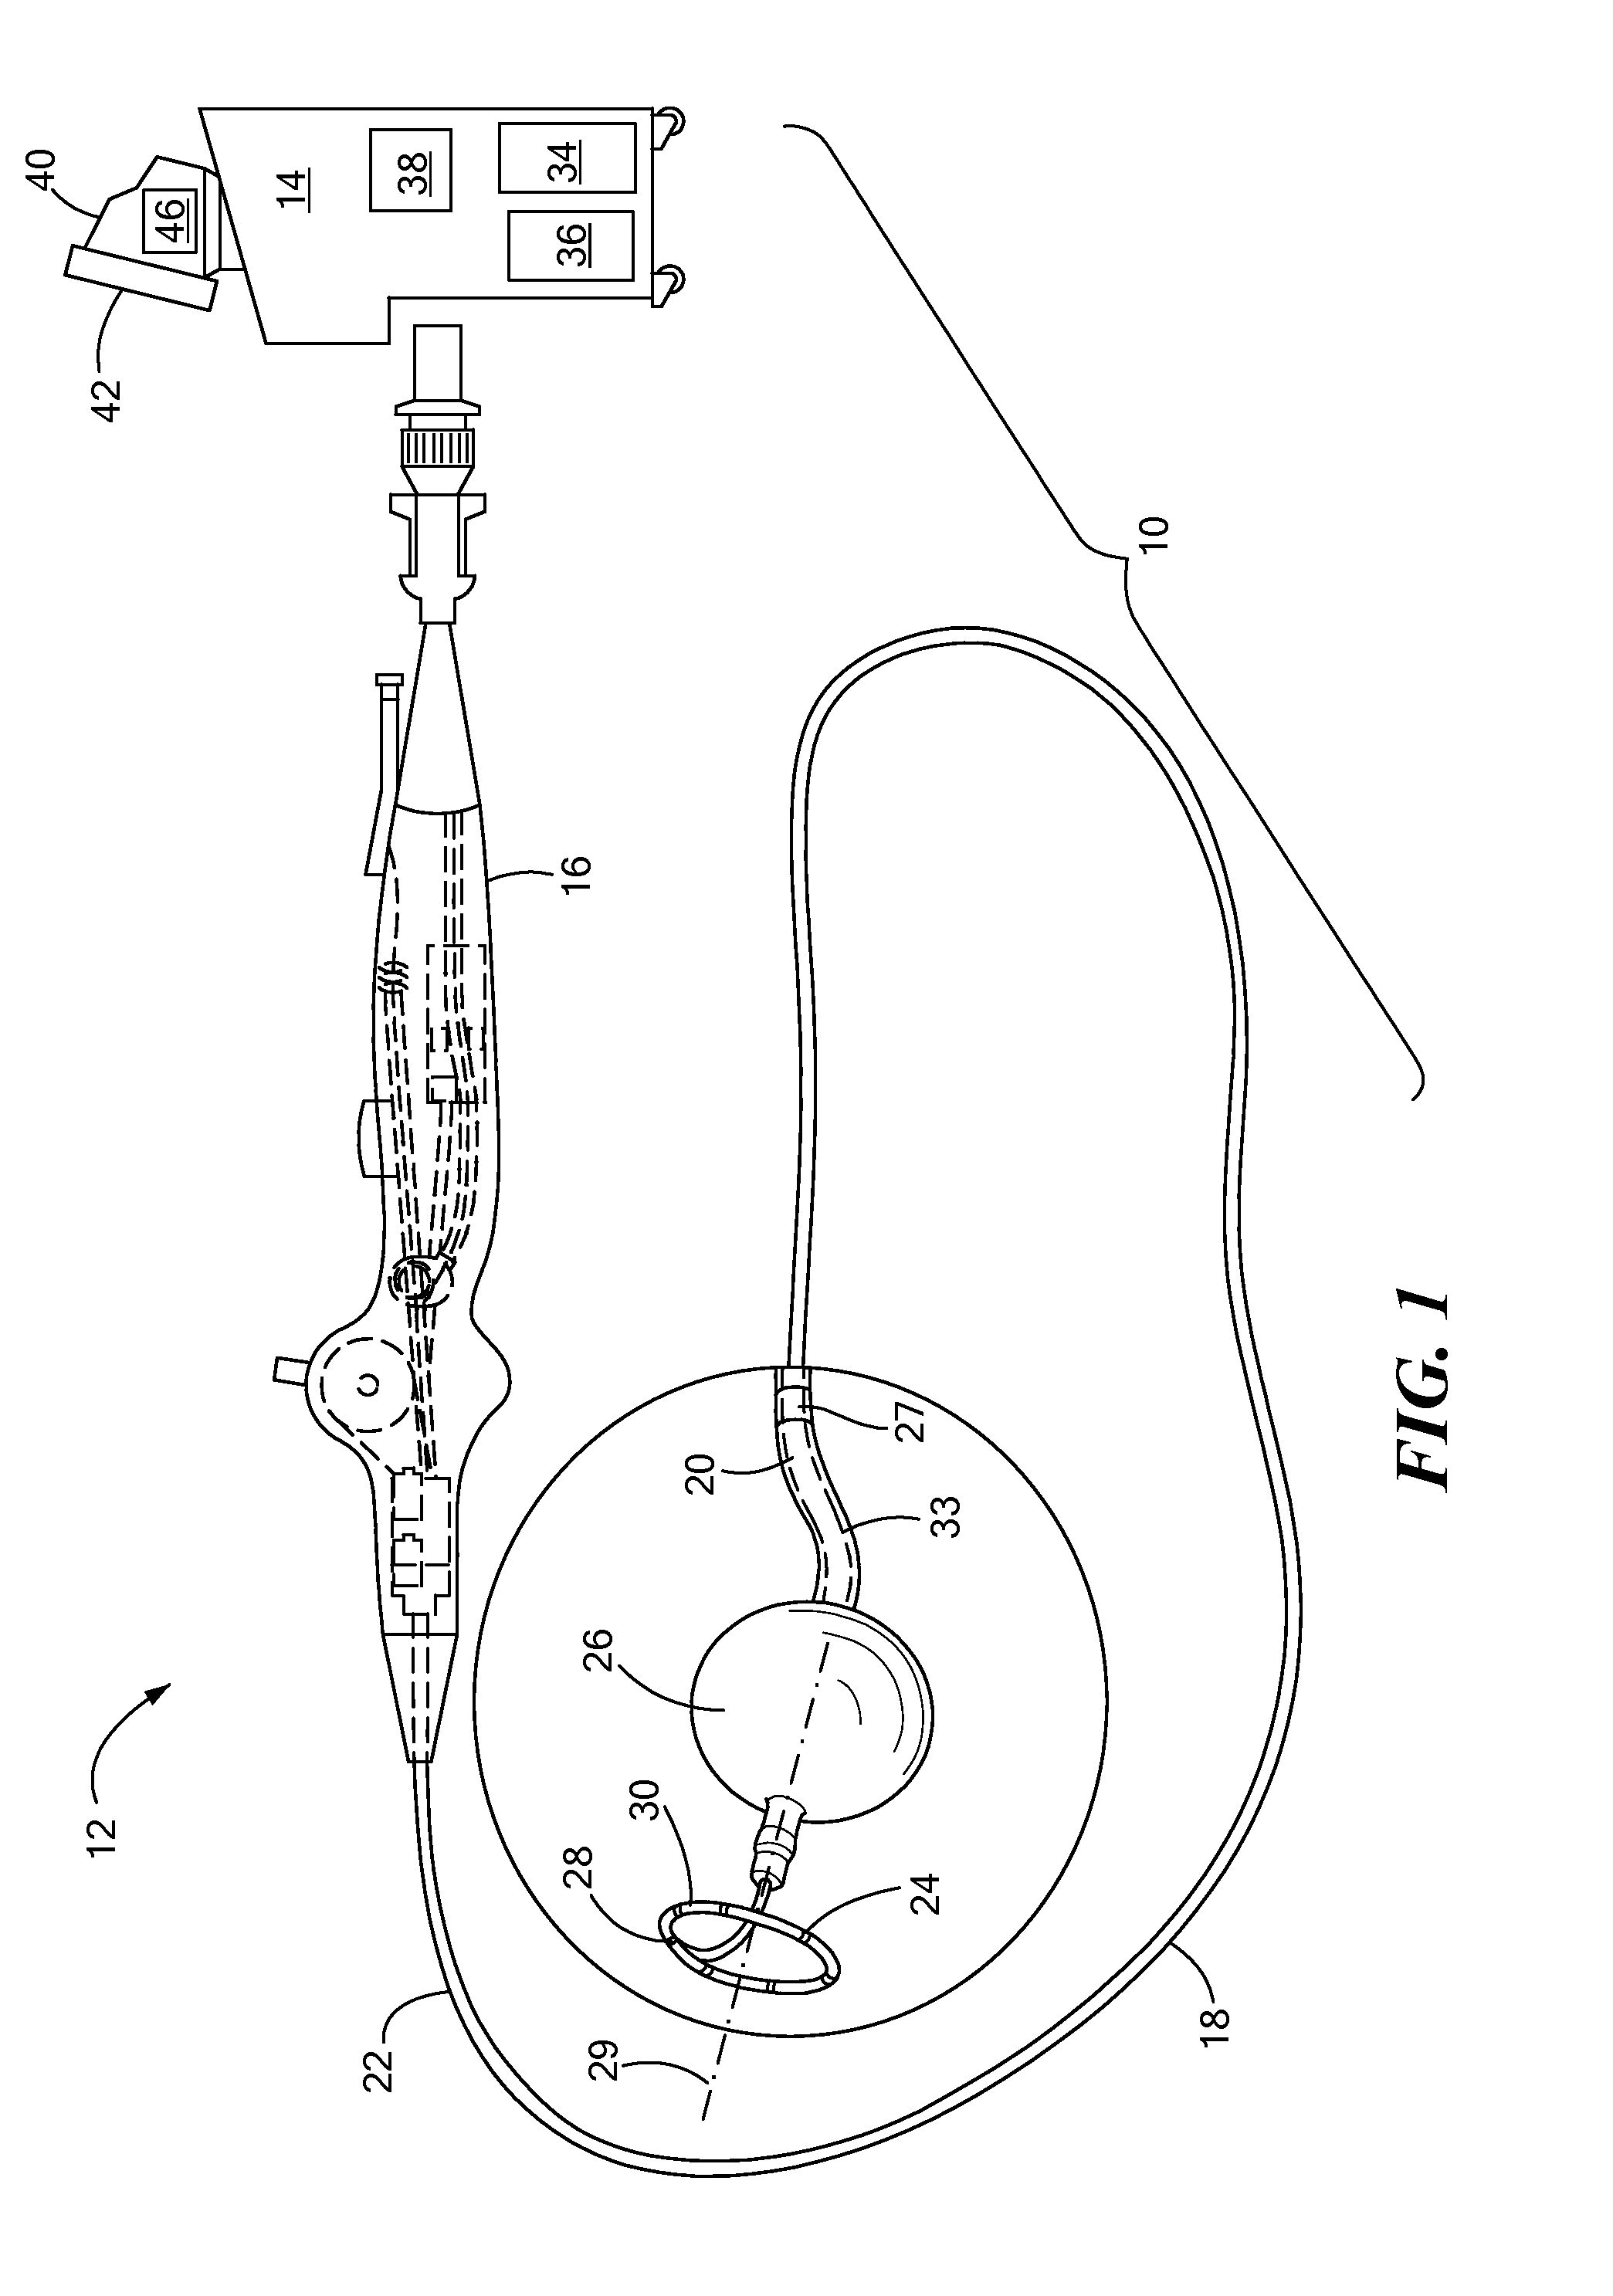 Method and apparatus for using phonomyography to prevent nerve damage during a medical procedure